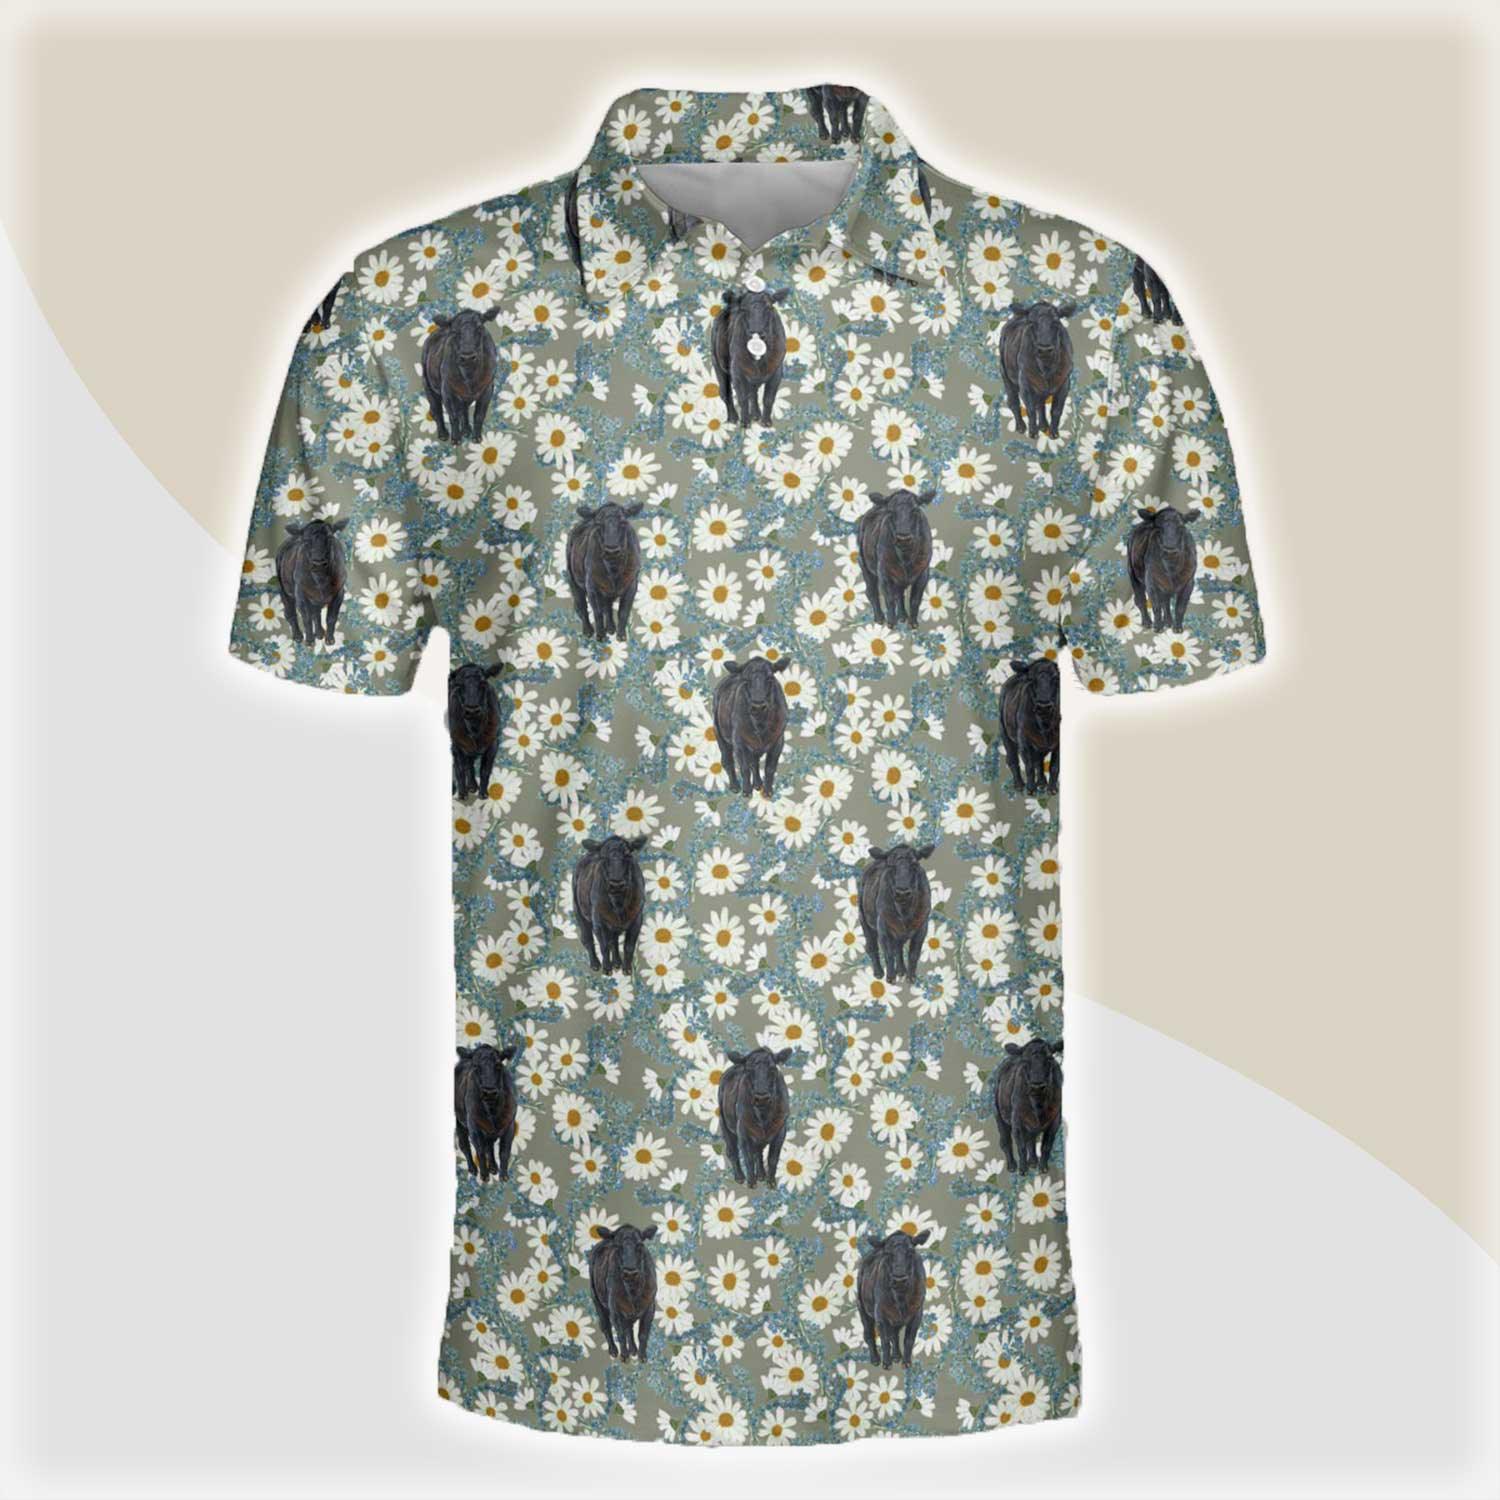 Black Angus Men Polo Shirts - Black Angus Camomilles Flower Grey Pattern Button Shirts For Men - Perfect Gift For Black Angus Lovers, Cattle Lovers - Amzanimalsgift